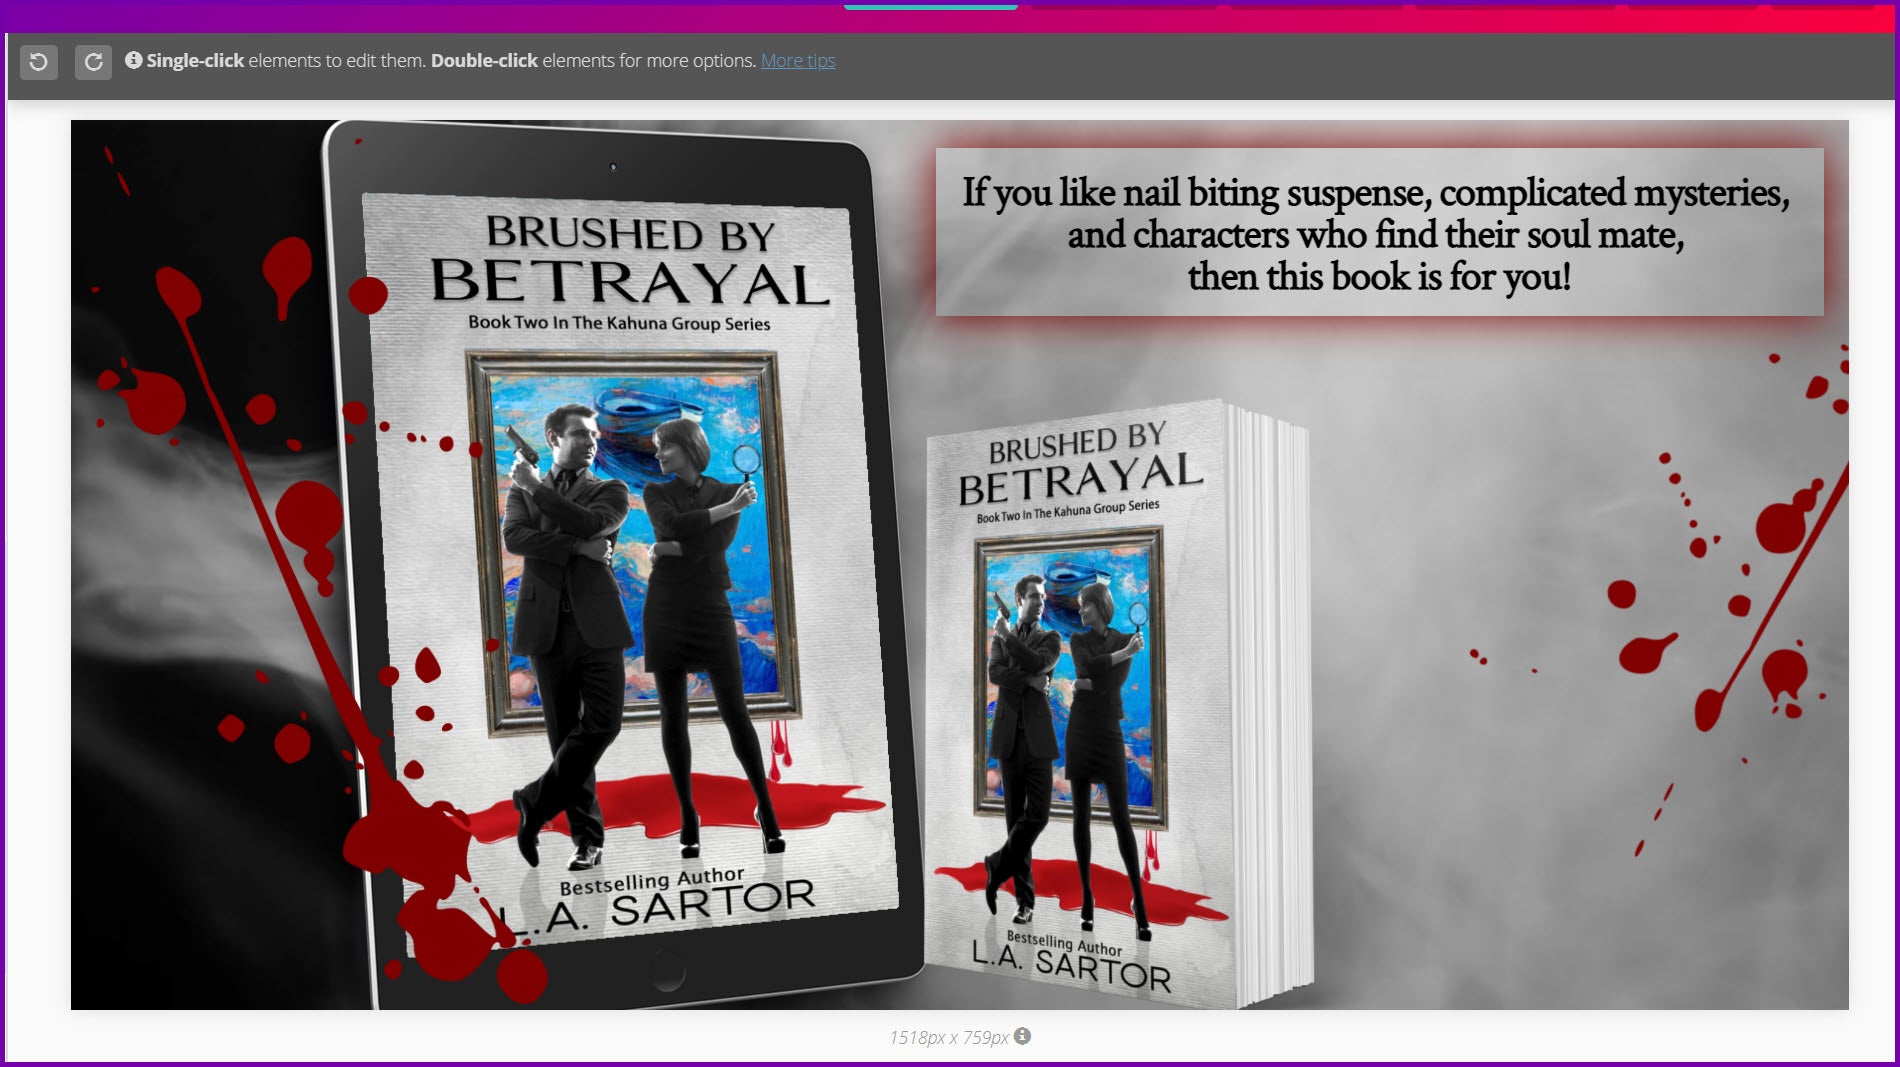 The designed ad for L.A. Sartor's Brushed By Betrayal suspense with books and blood splatters laid out as wanted